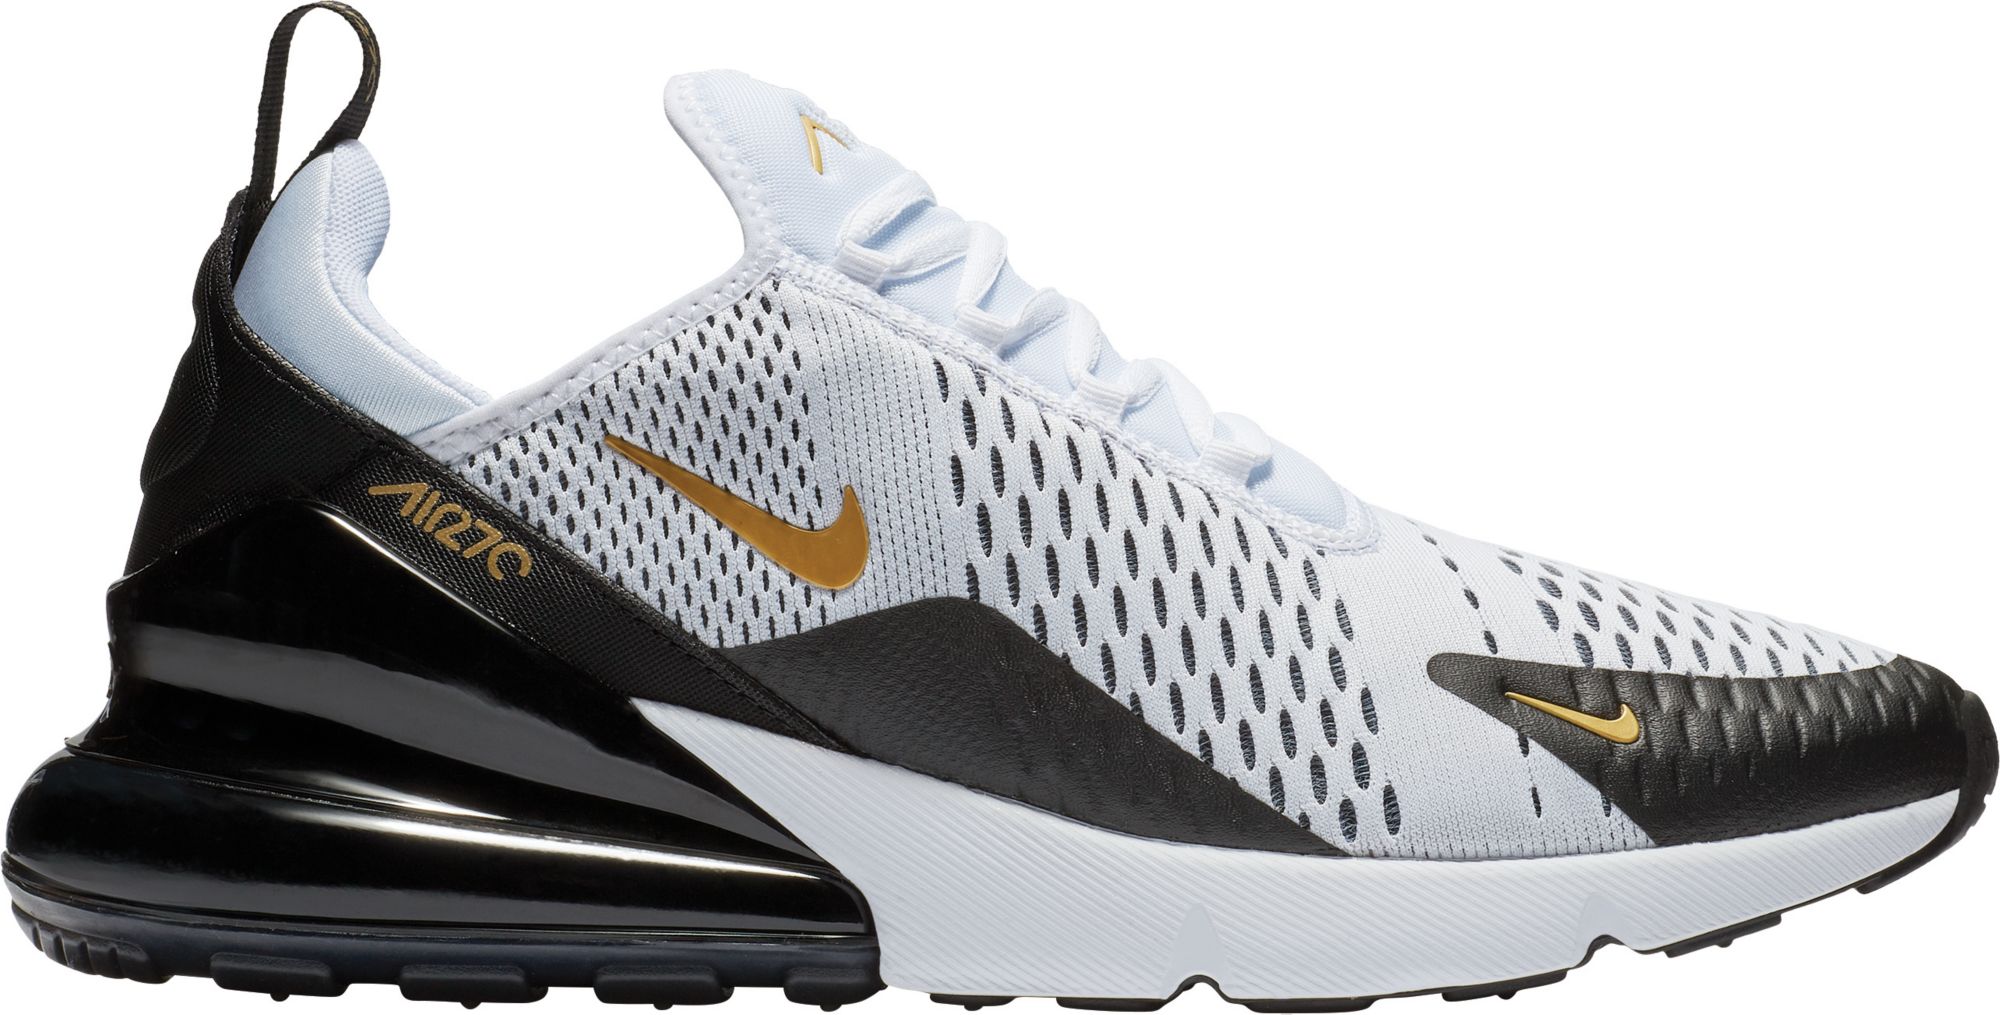 white and gold air max 270